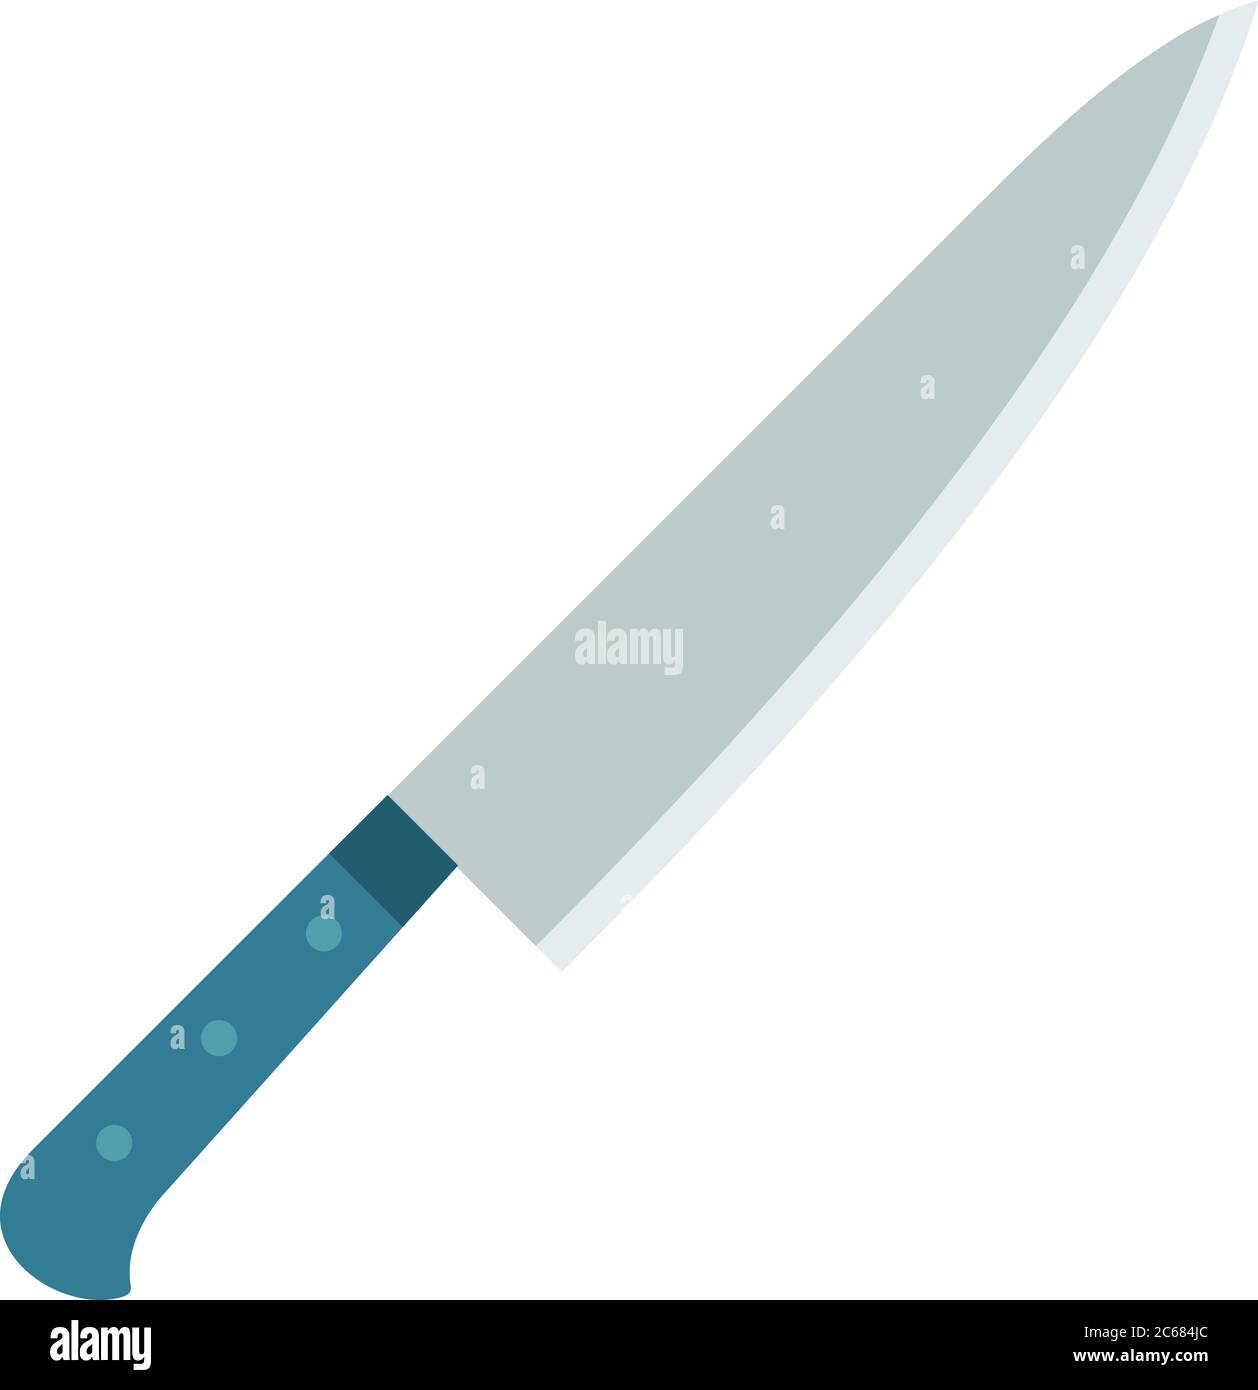 https://c8.alamy.com/comp/2C684JC/kitchen-knife-with-a-wide-blade-vector-flat-isolated-on-white-2C684JC.jpg